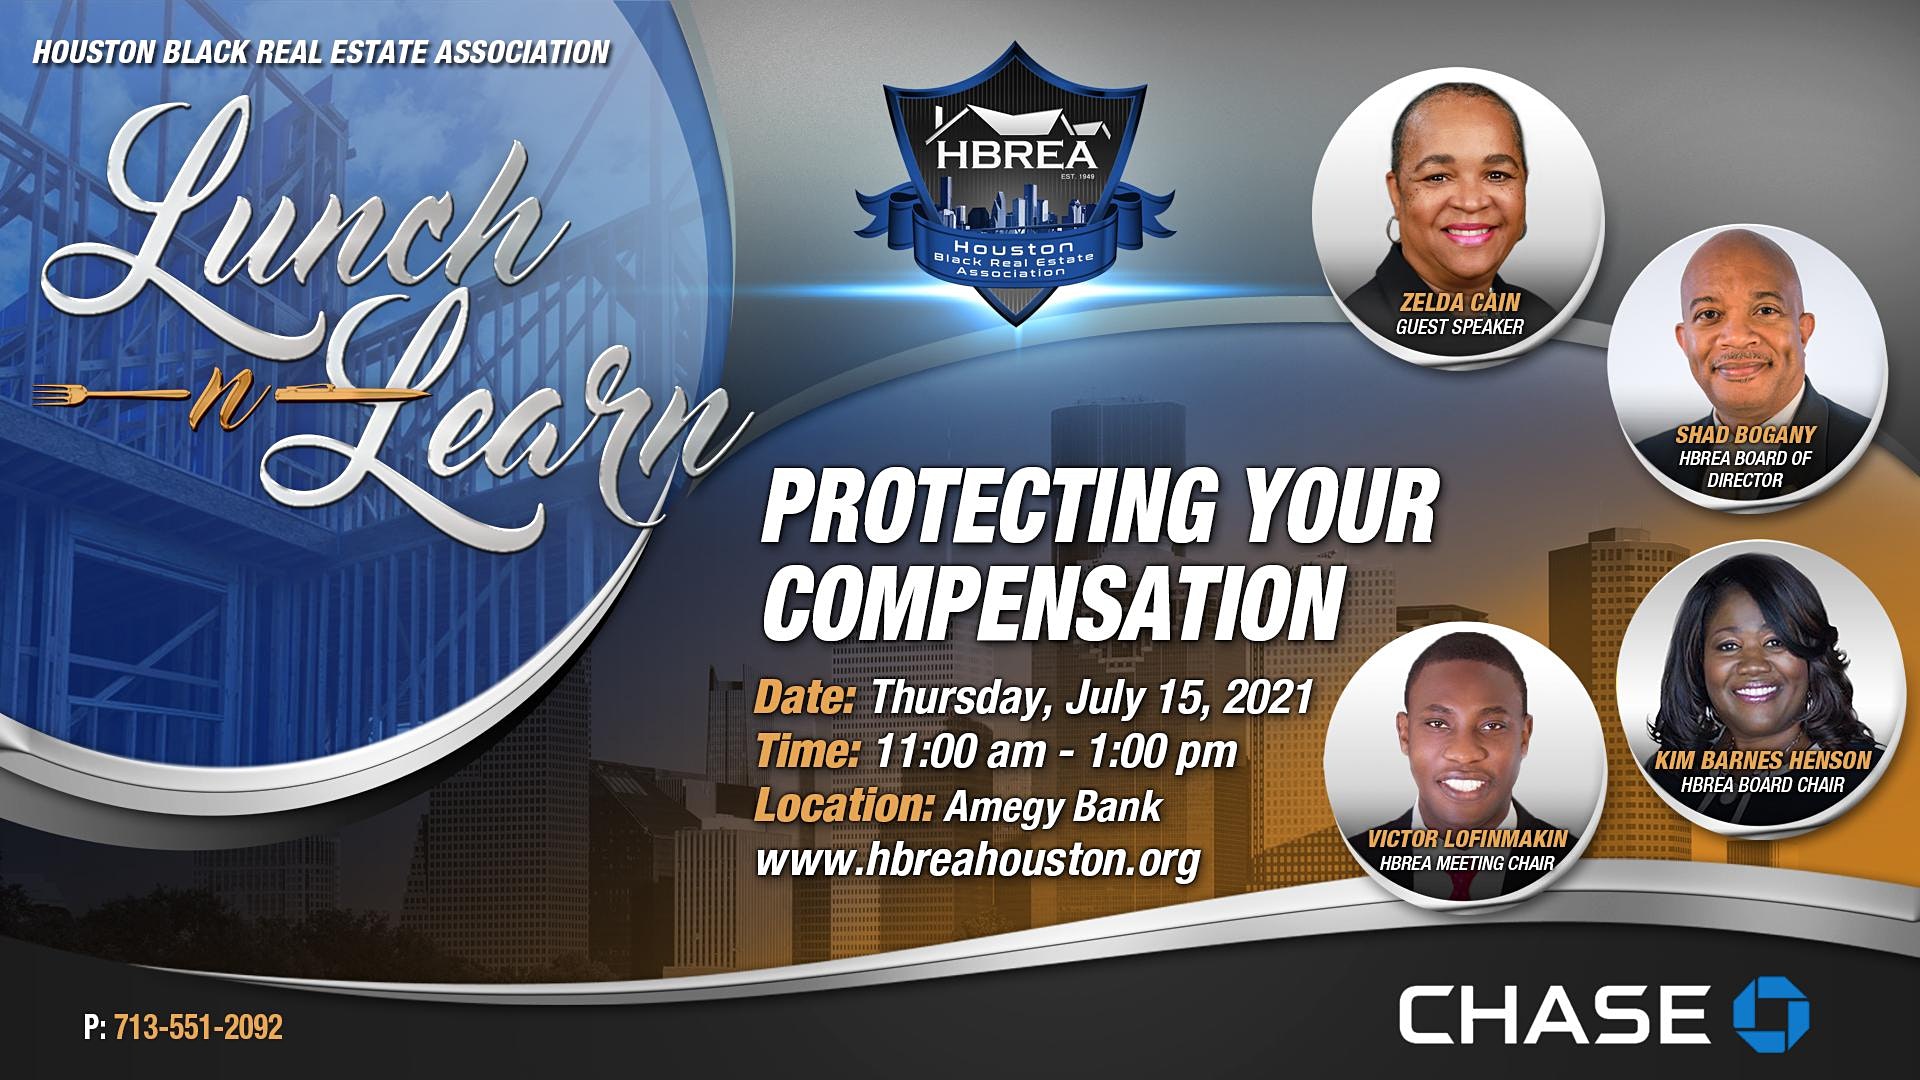 Lunch-n-Learn - Protecting Your Compensation